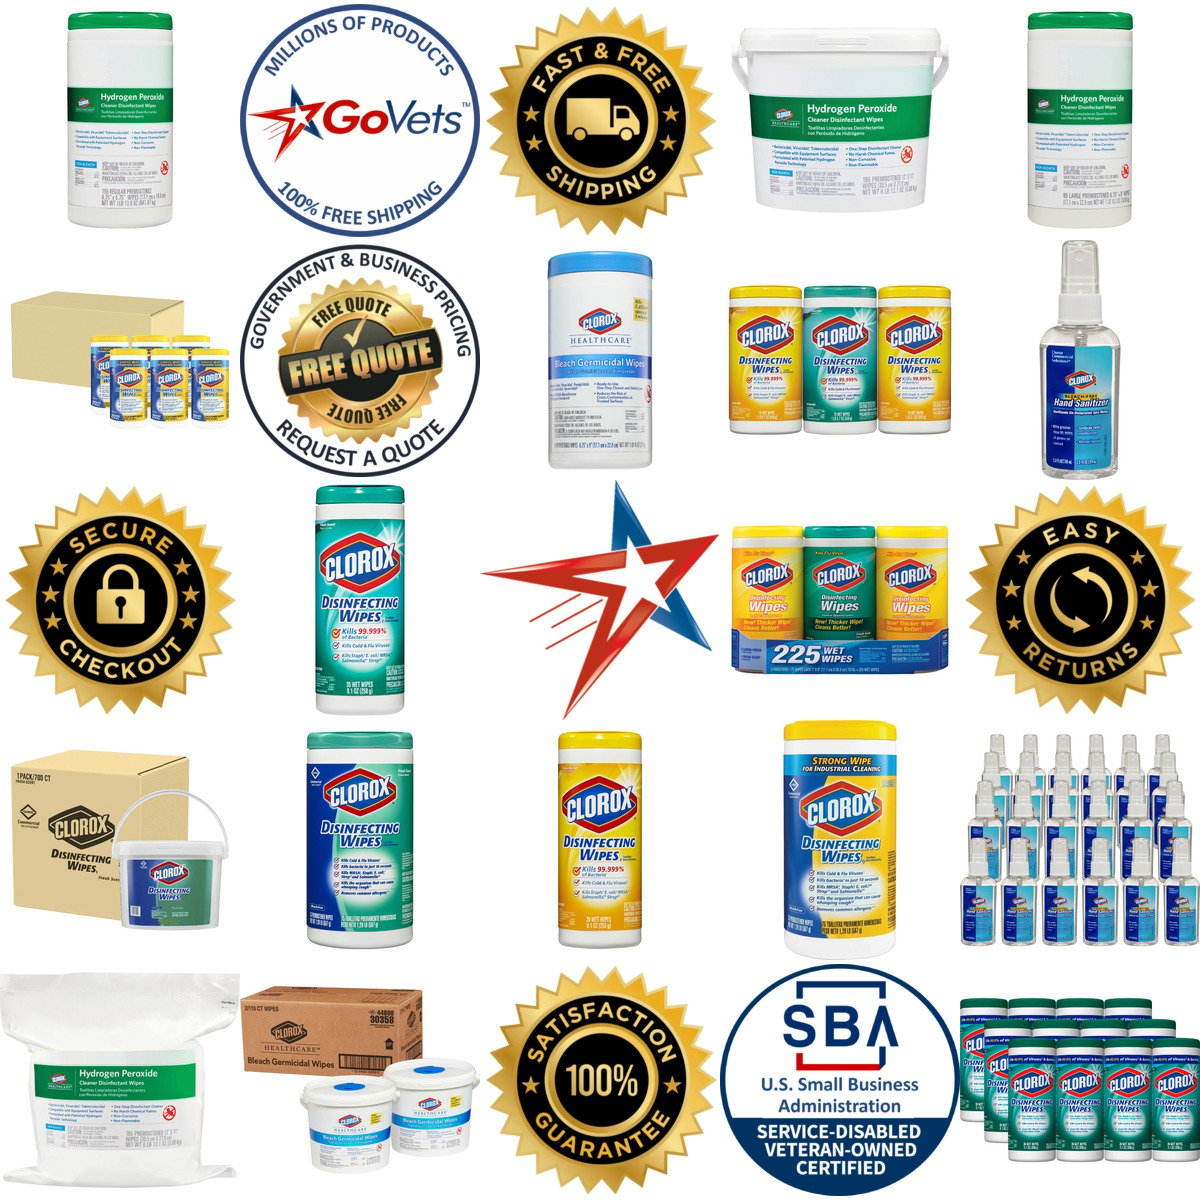 A selection of The Clorox Company products on GoVets